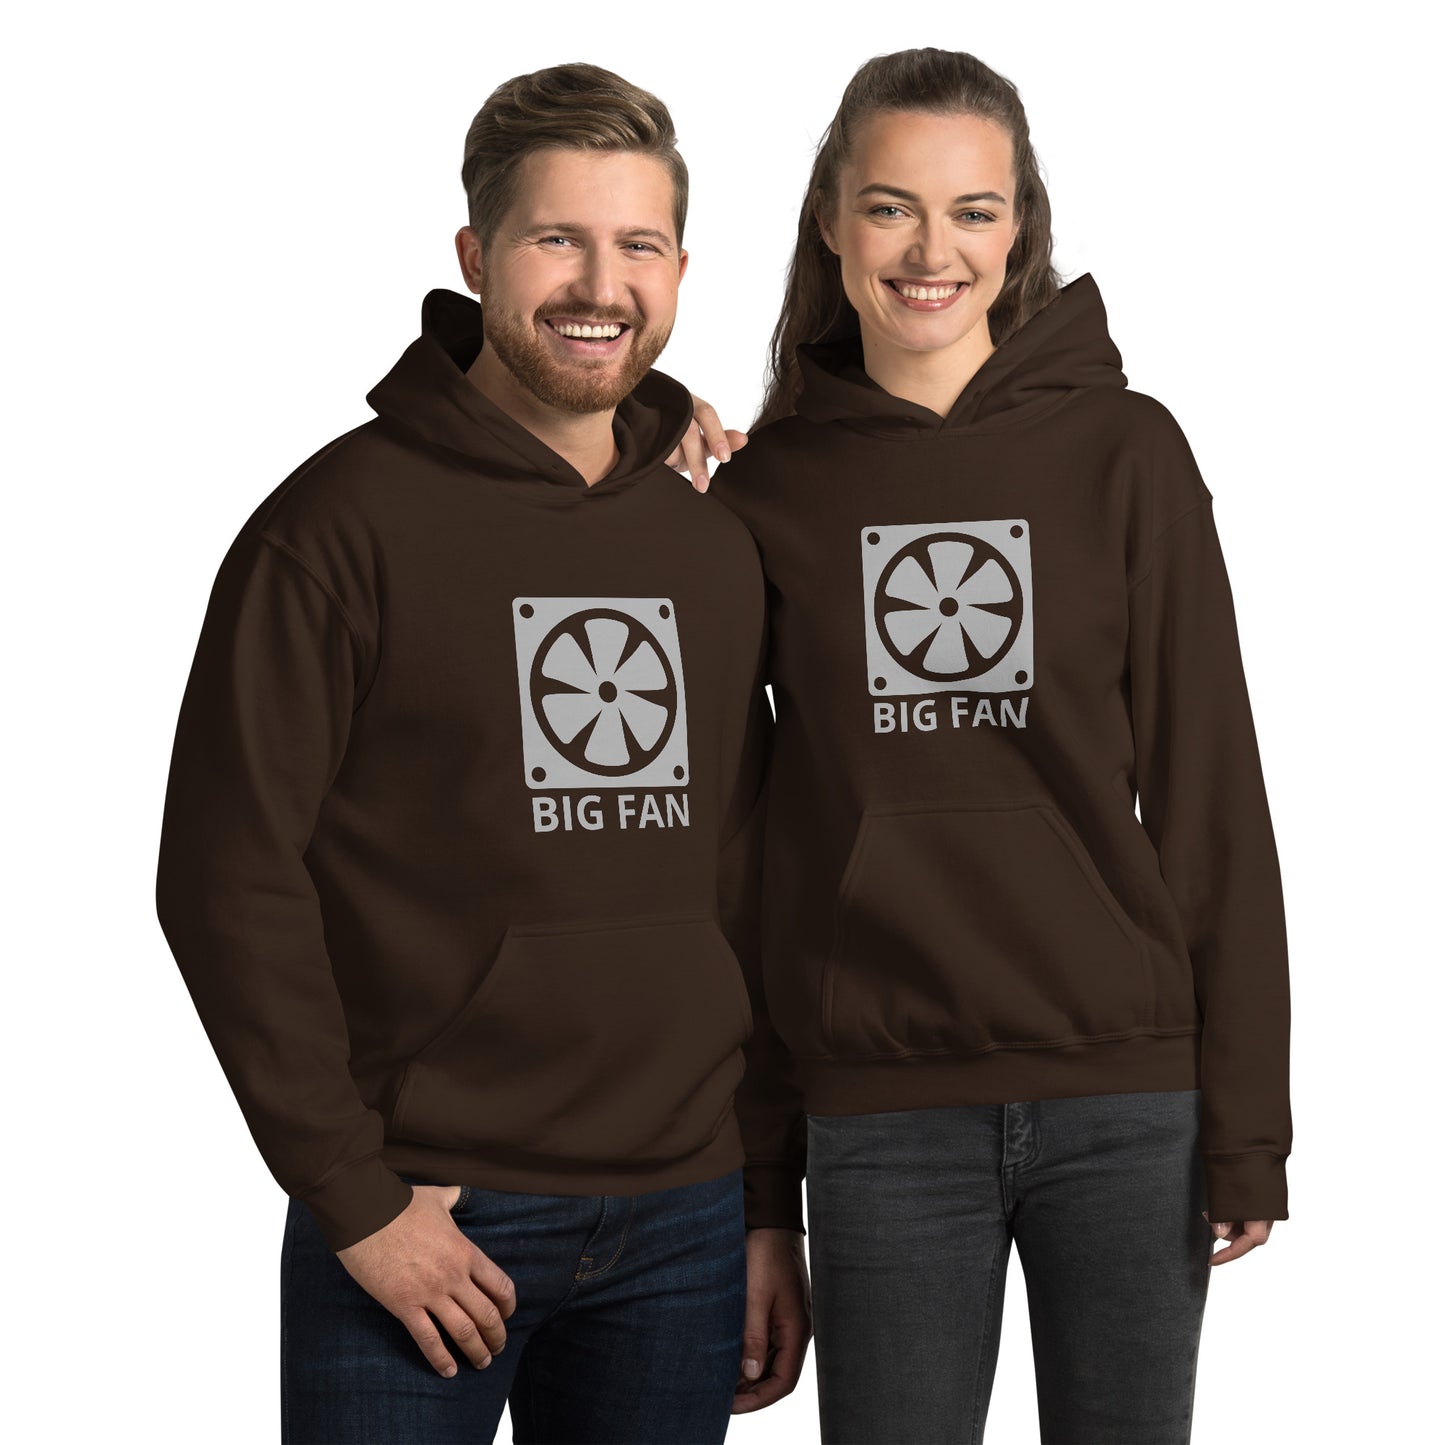 Man and women with dark brown hoodie with image of a big computer fan and the text "BIG FAN"